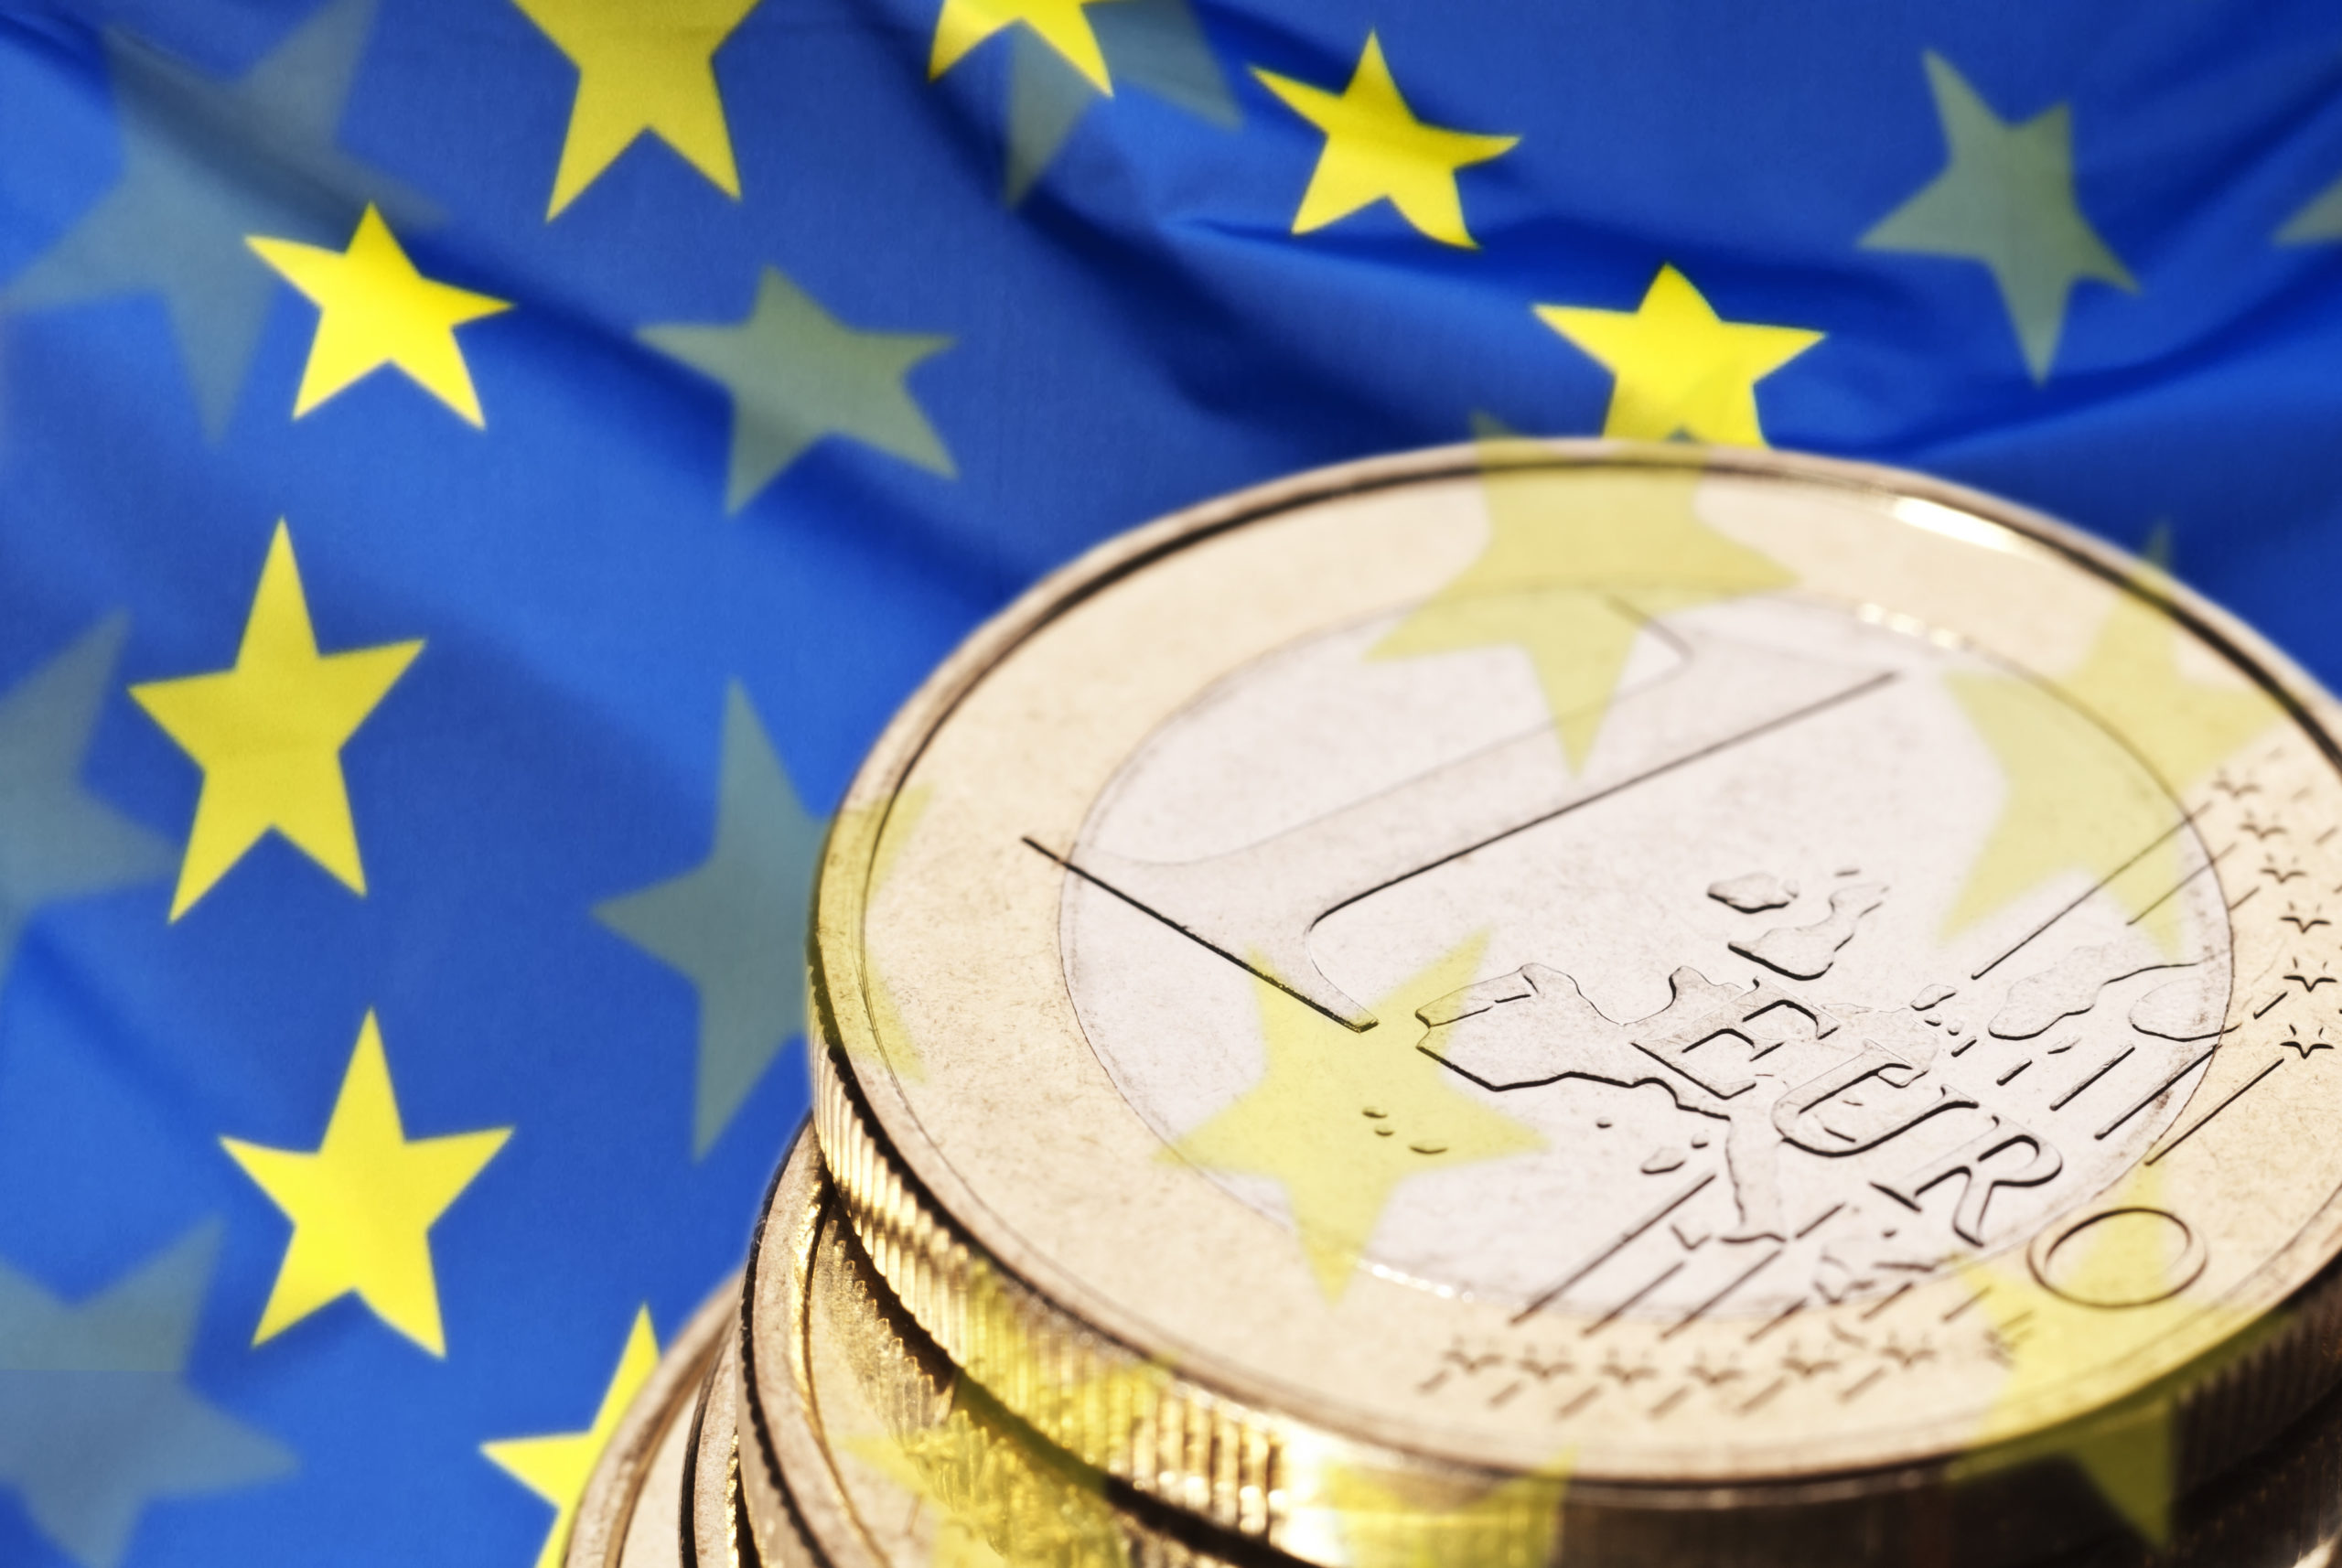 How Will the Euro React? Anticipating the ECB Press Conference